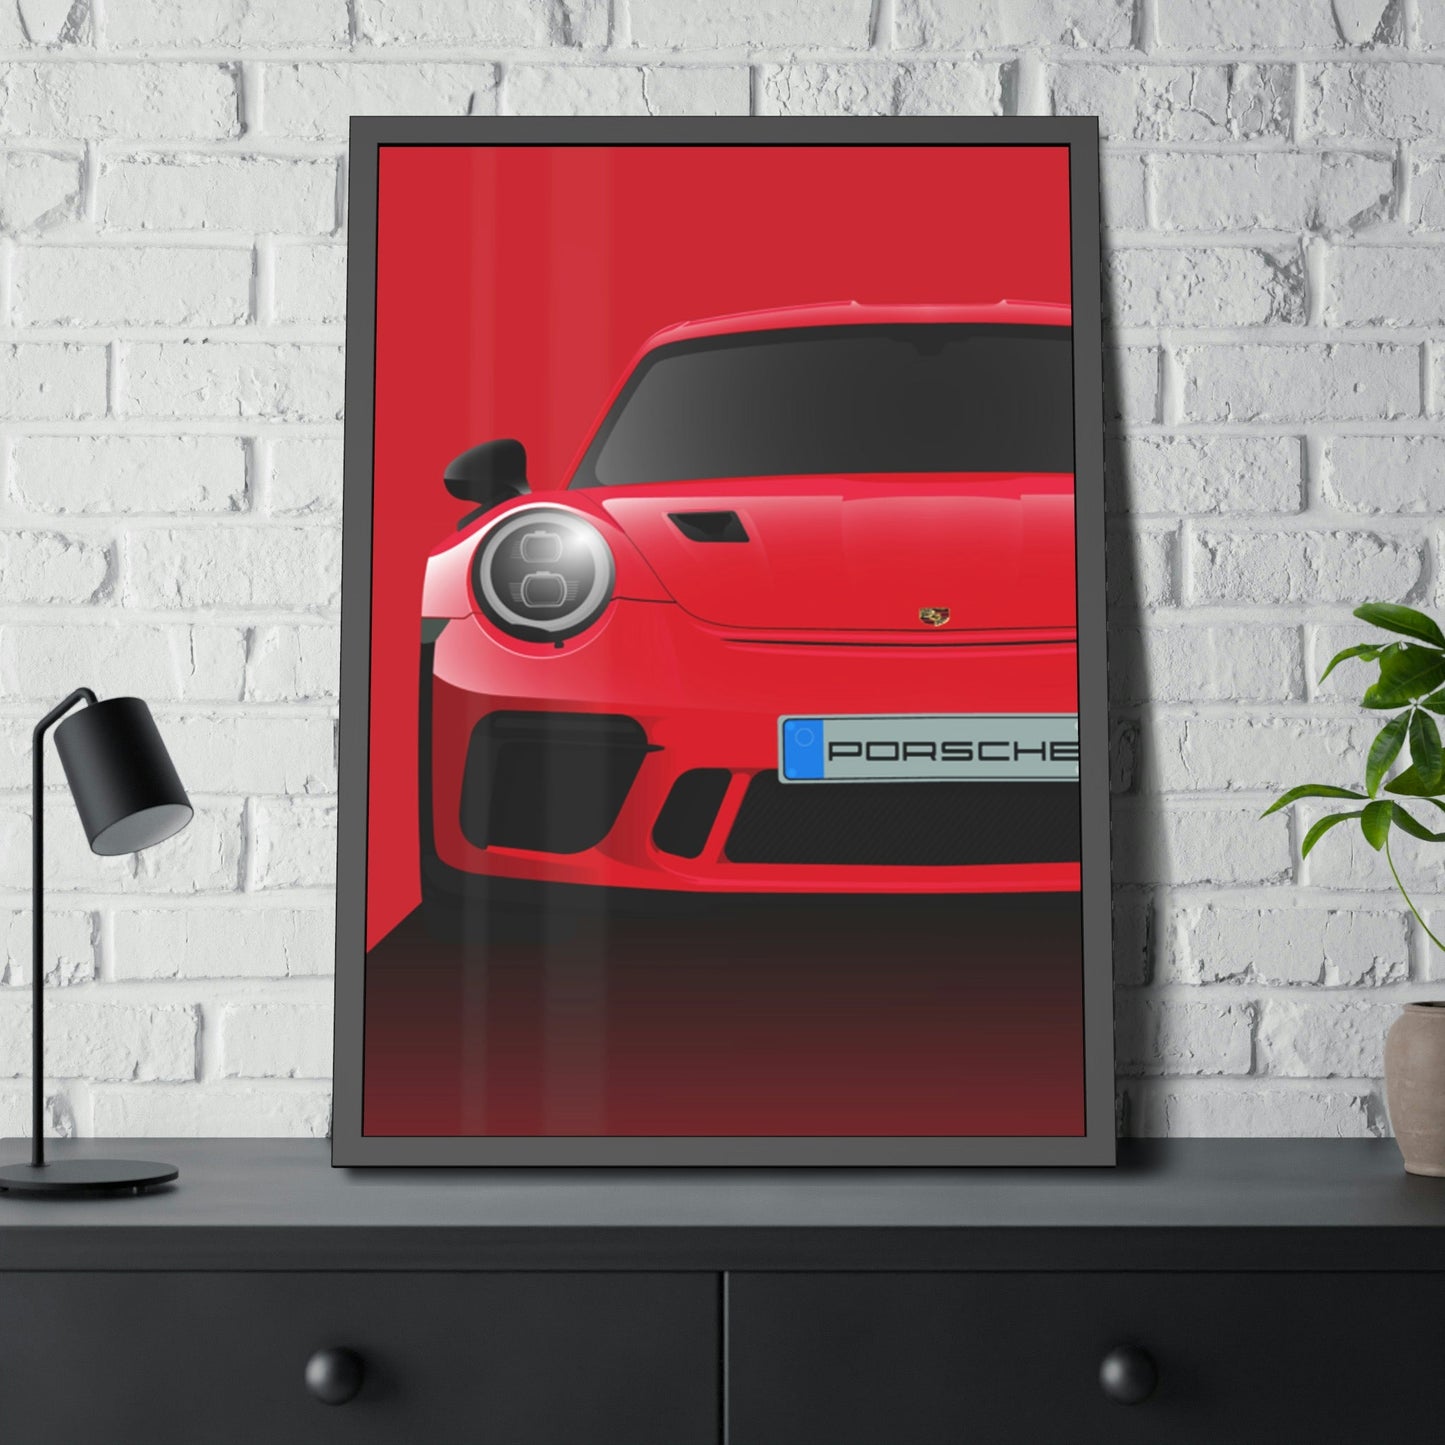 The Red Rocket: A Poster Print of a Red Porsche That Captivates the Eye